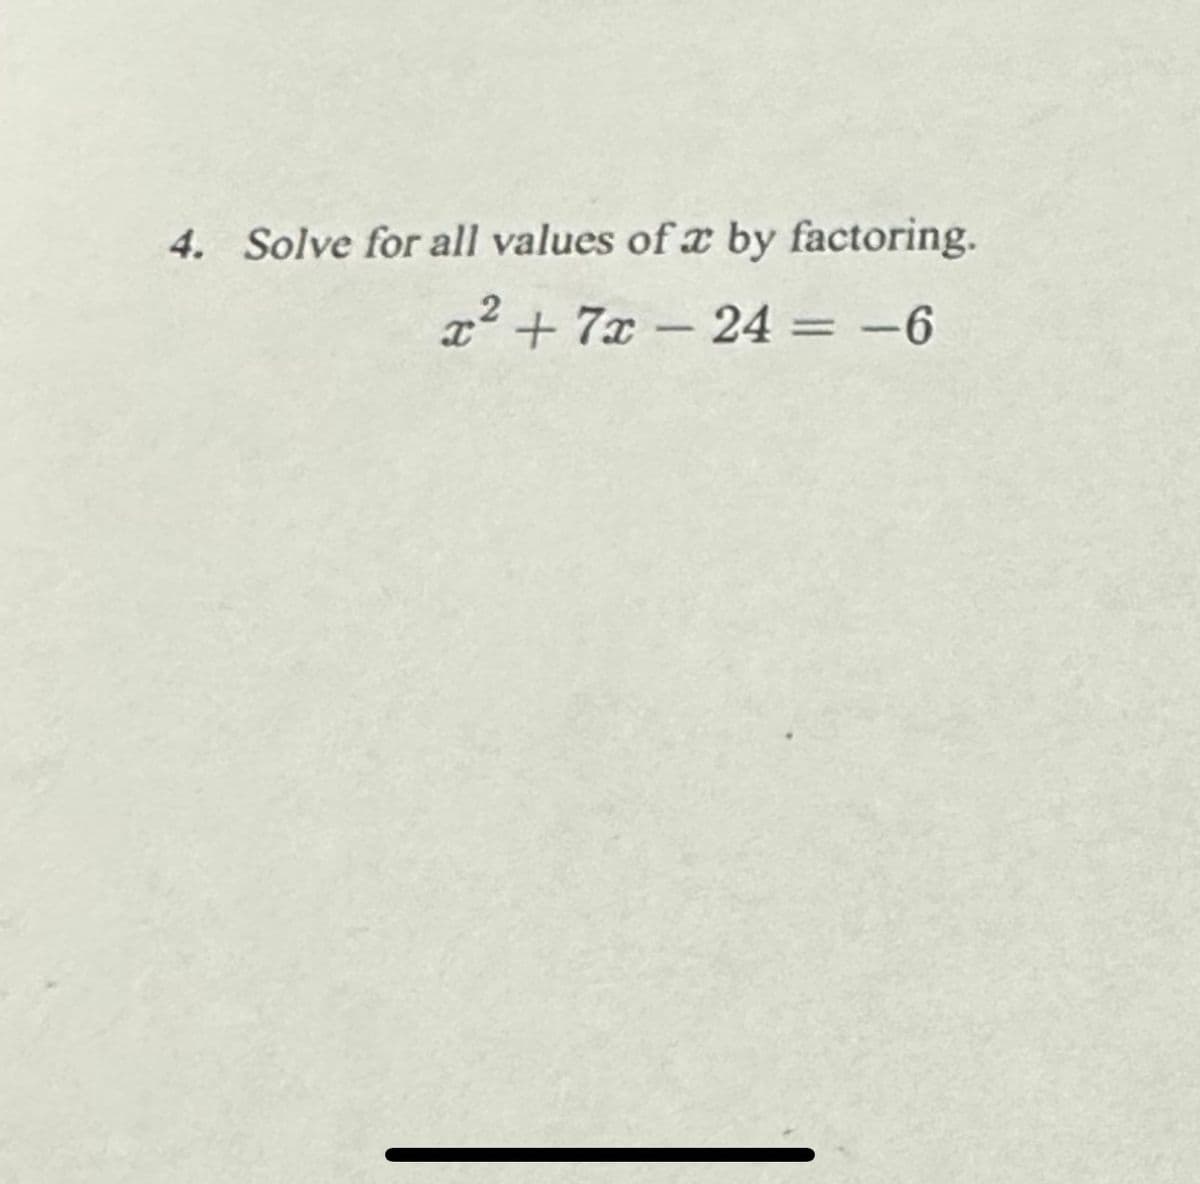 4. Solve for all values of a by factoring.
x² + 7x - 24 = -6